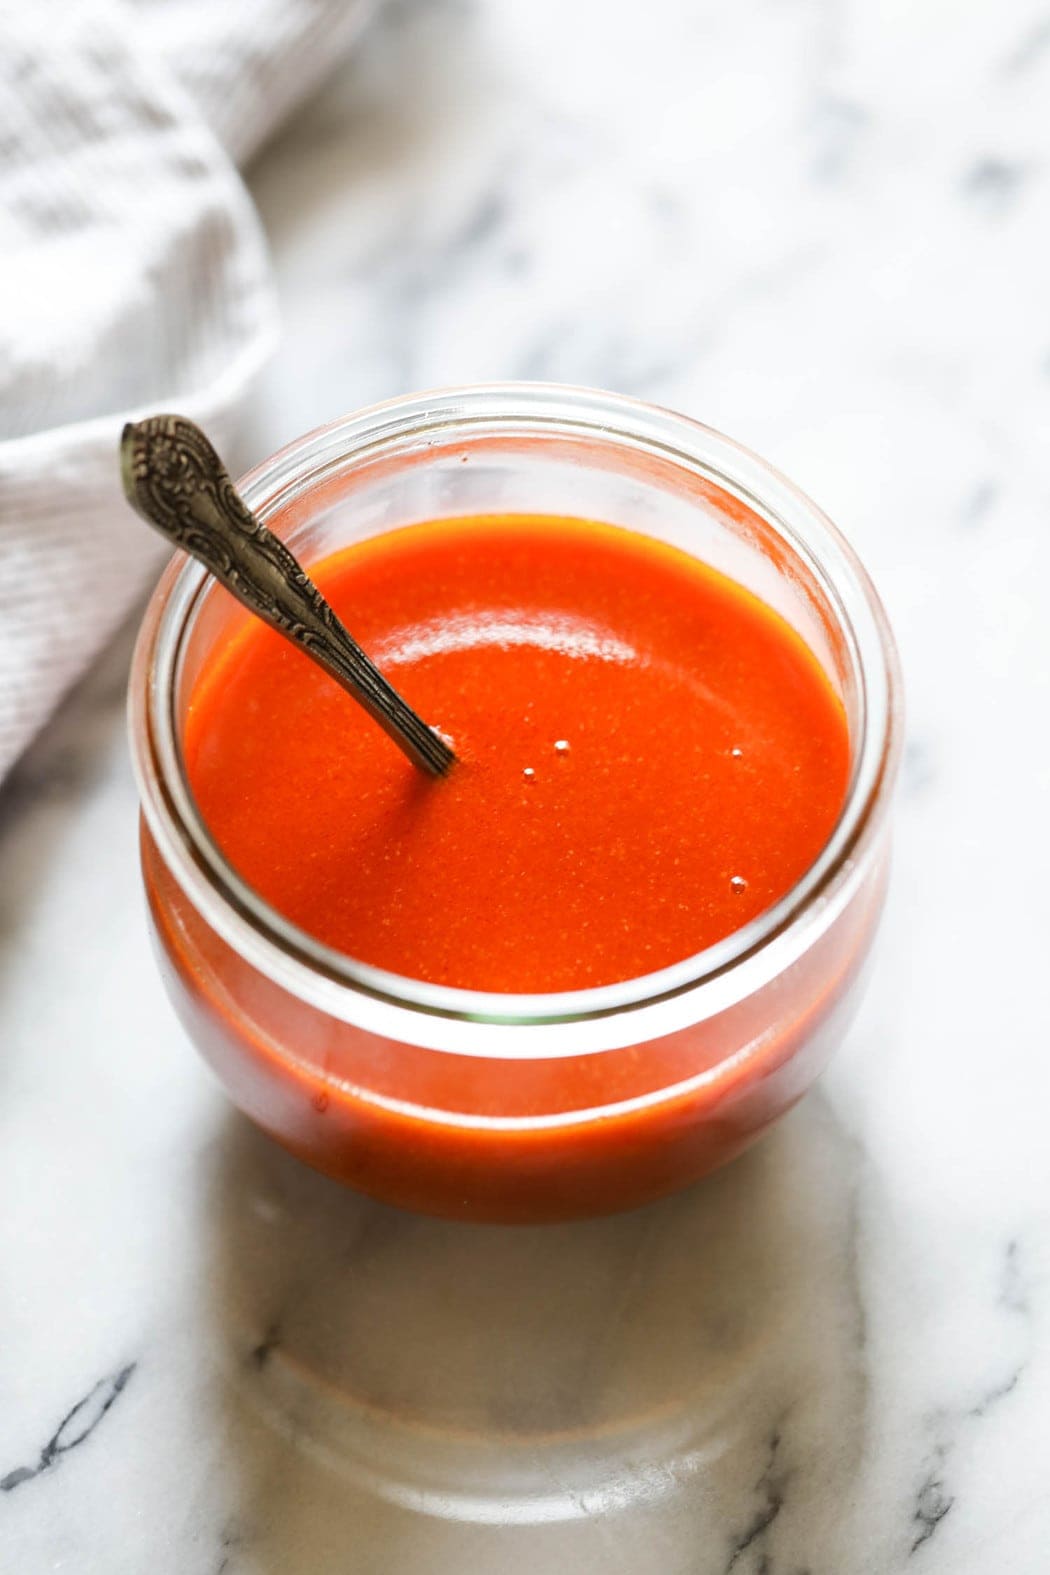 Homemade Buffalo Sauce (Whole30 + Easy) - The Real Food Dietitians